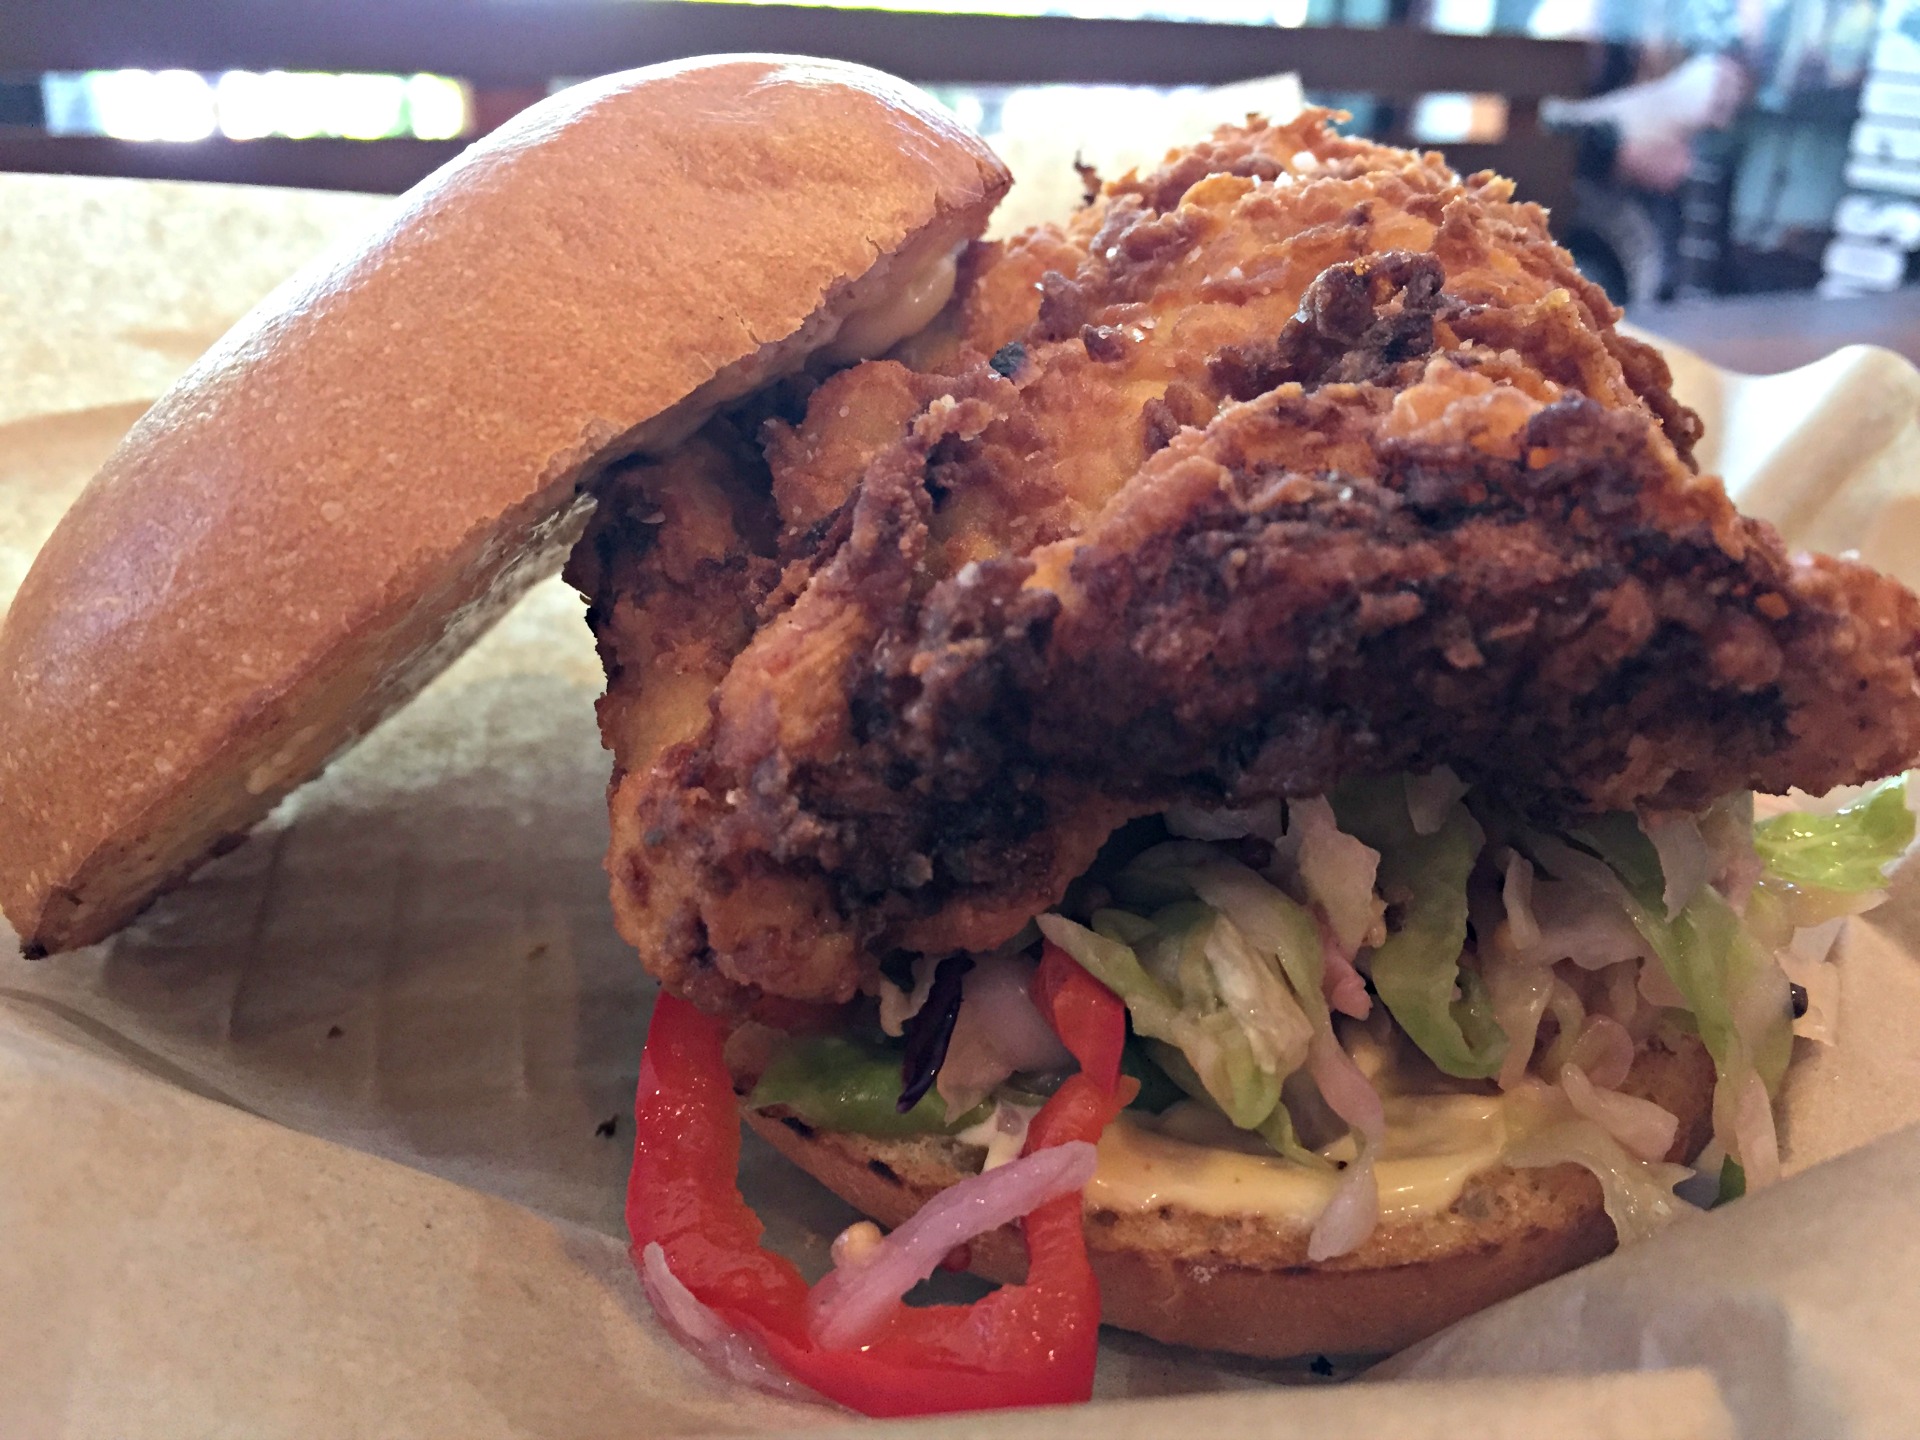 The fried chicken sandwich from Show Dogs.